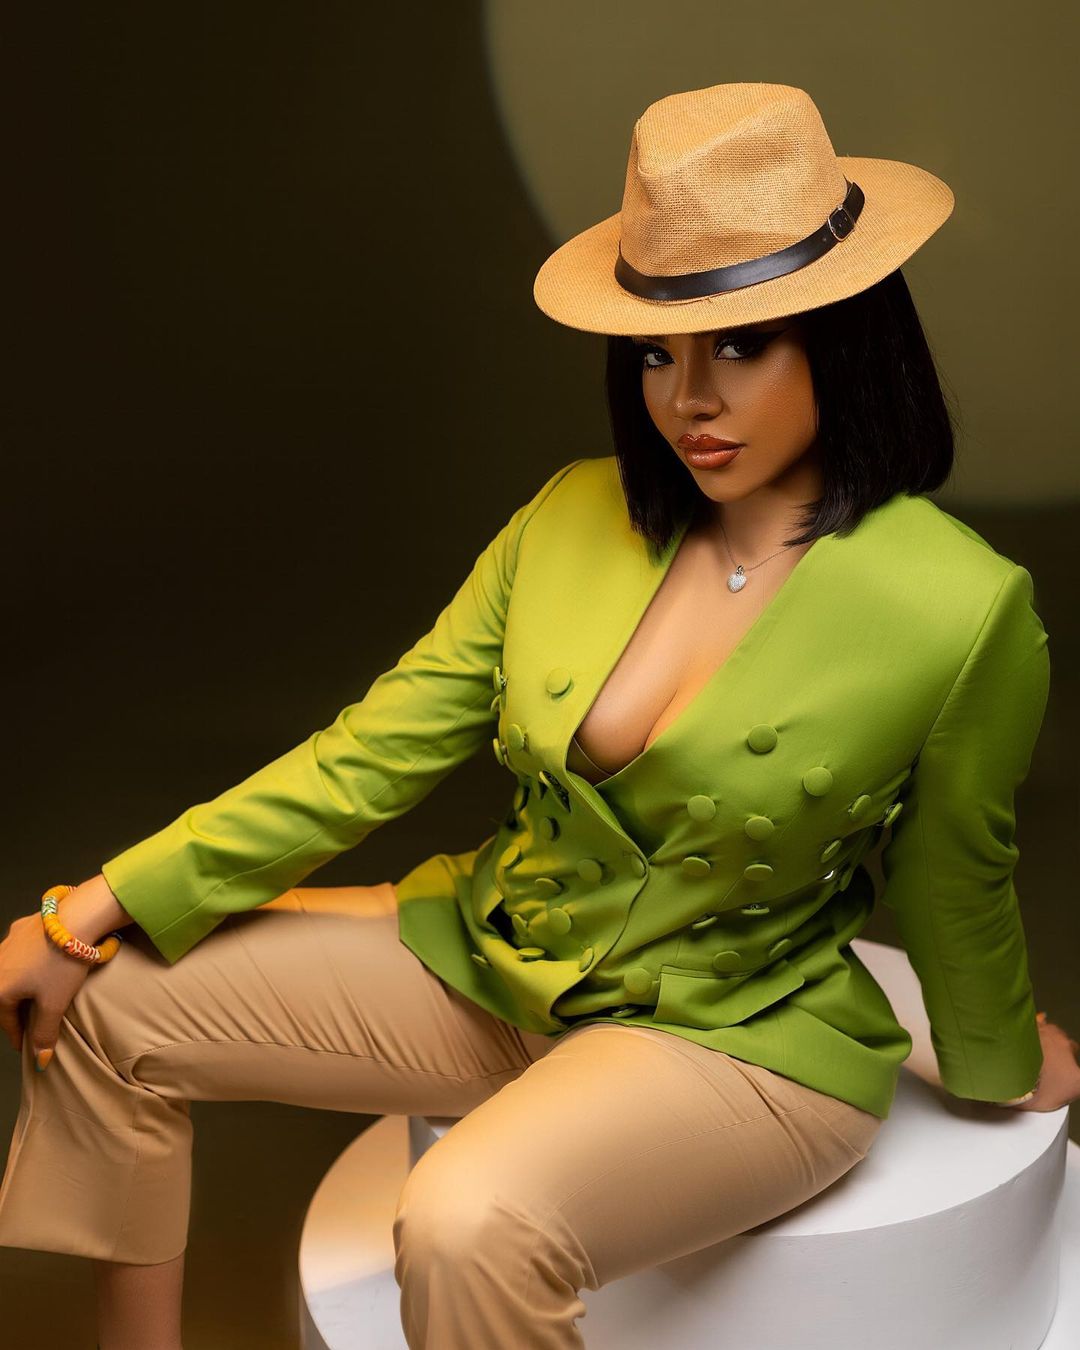 "Giving Cardi B vibes" - Mixed reactions as Nengi spends N17 million on butt tattoo